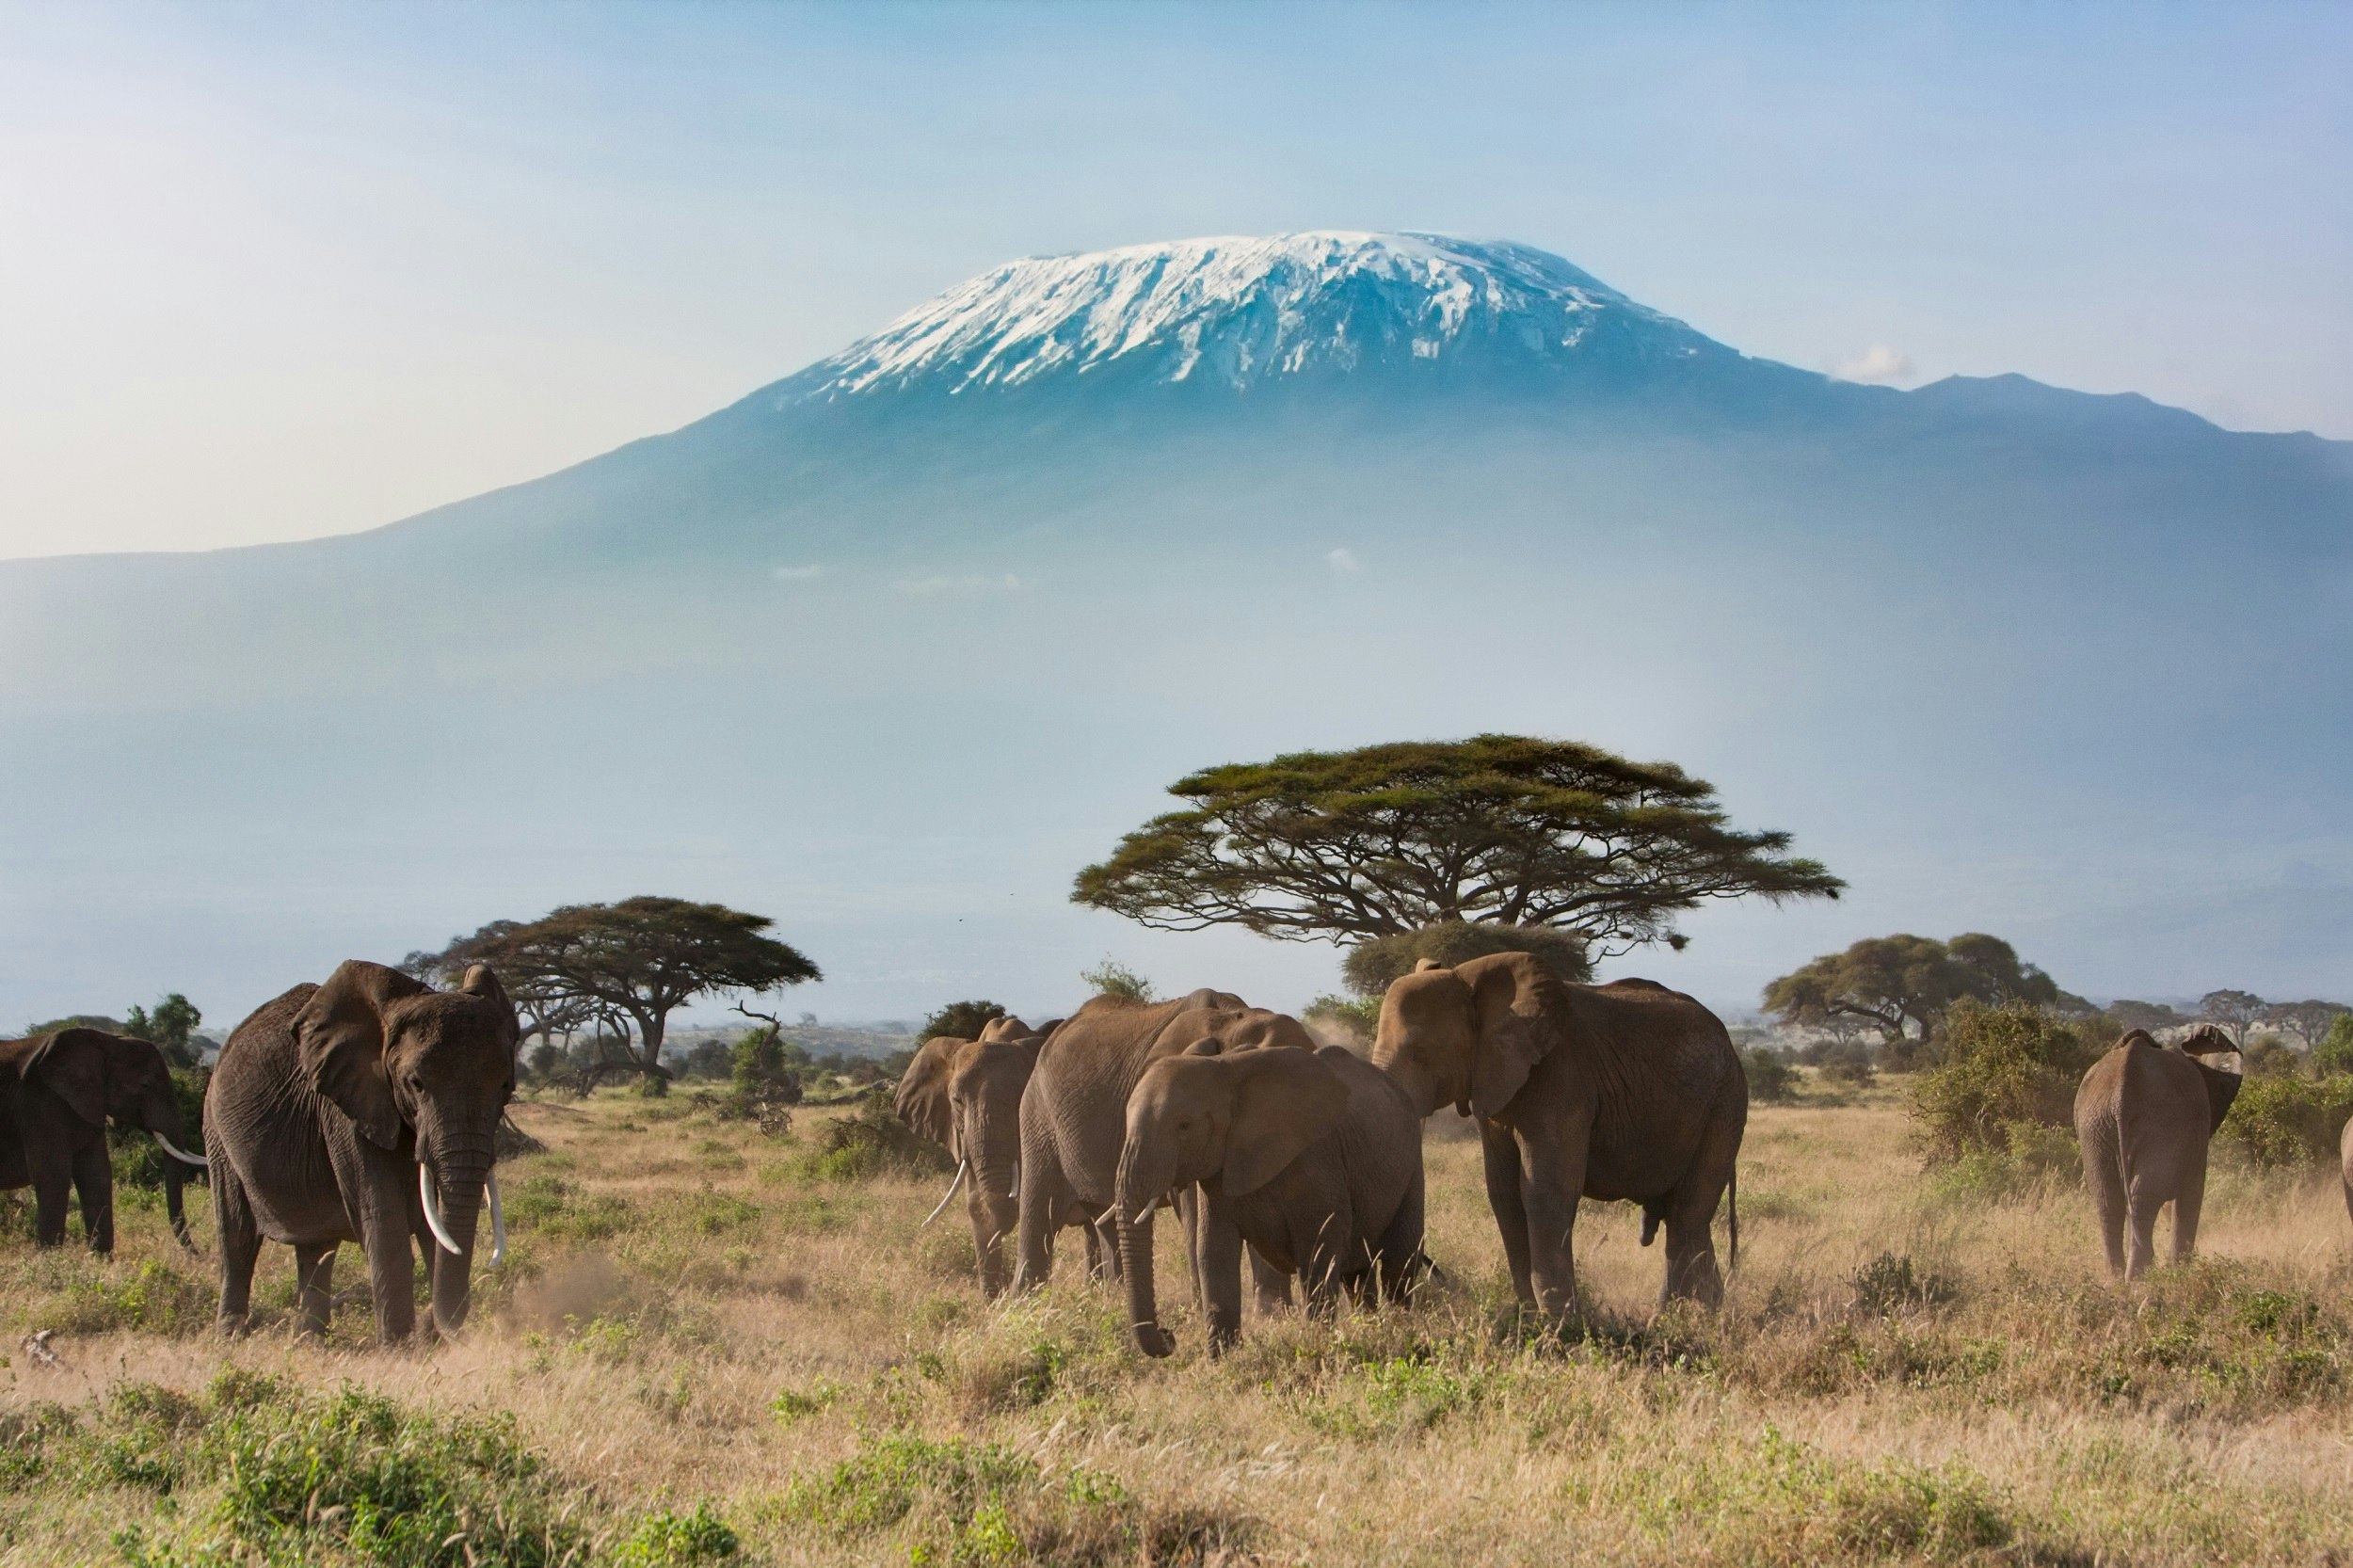 A herd of elephants stand on the grassy plains, with the snow-capped summit of Kilimanjaro standing as a backdrop.